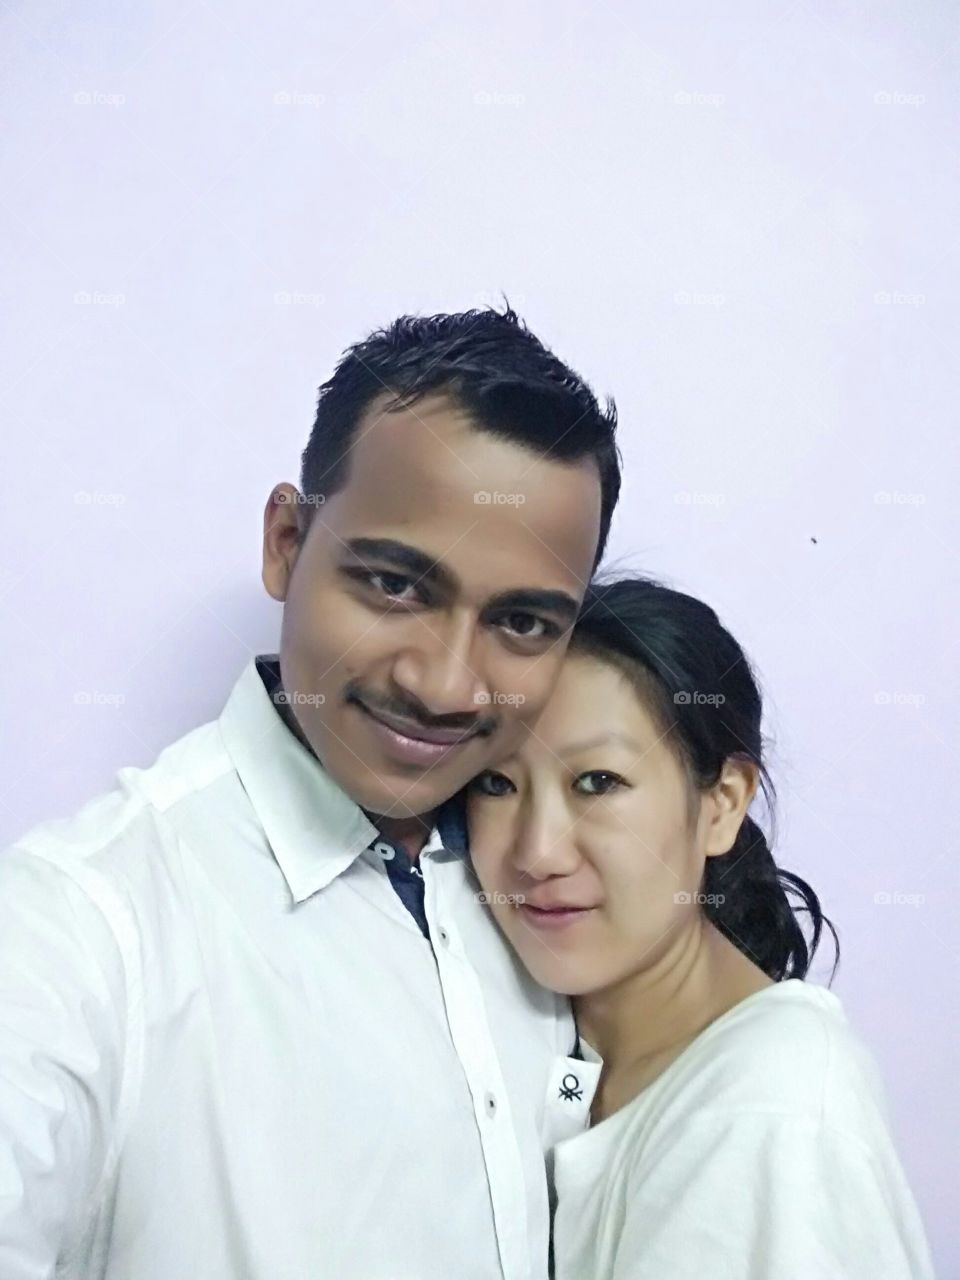 i am from india andmy fiancee is from china